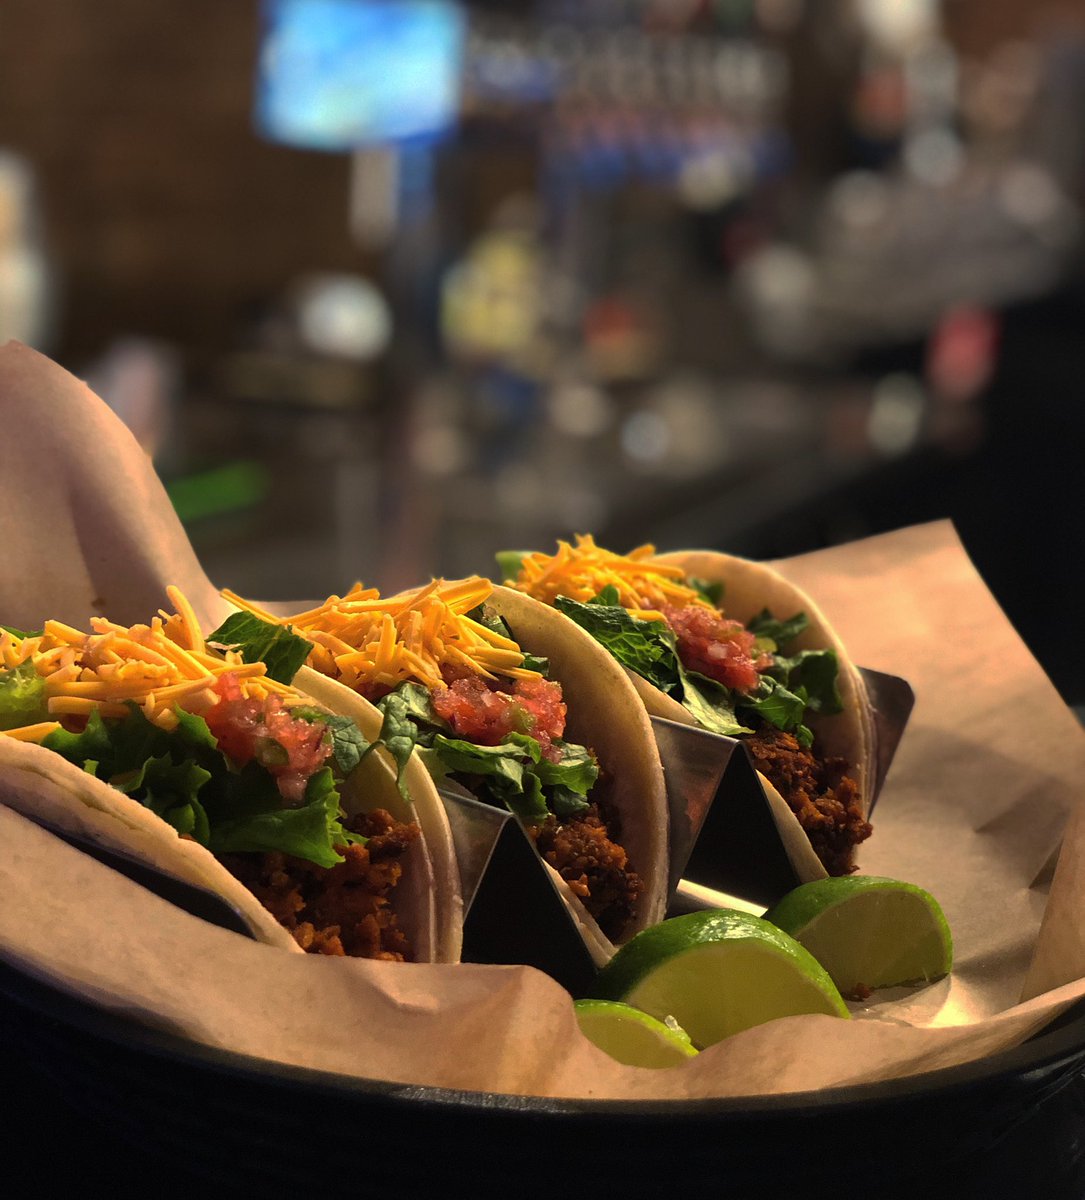 Did someone say #tacotuesday?!?! 🌮😋 No? That’s awkward... I definitely just heard someone say they wanted tacos for dinner... Come in tonight for your Tuesday celebrations of tacos and margaritas! Kitchen and bar open at 5:30! 🌮🍹🎉